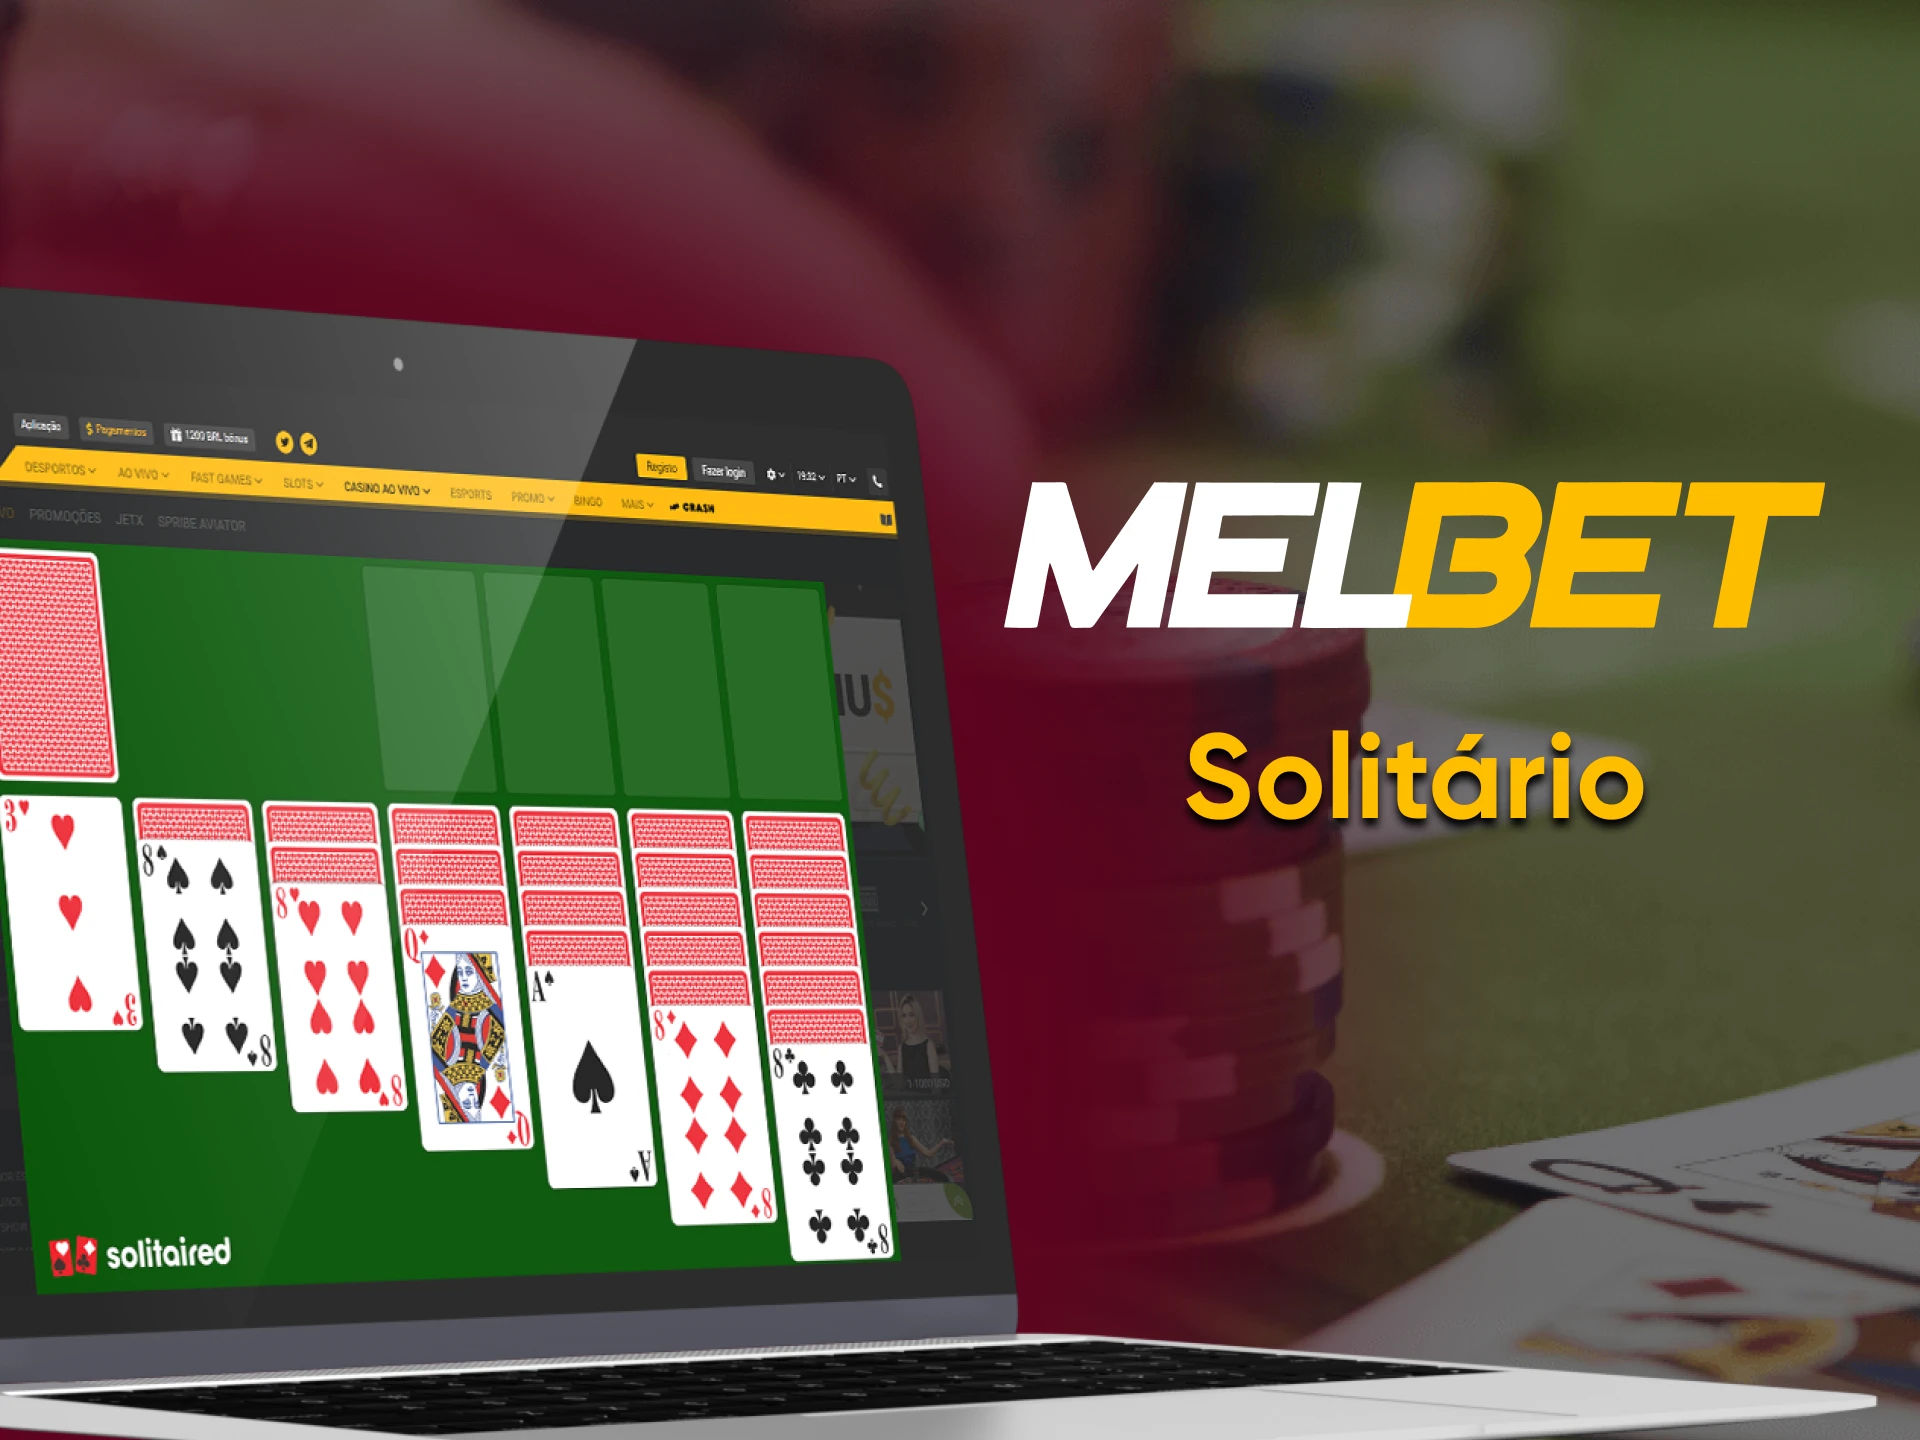 For playing at Melbet choose Solitaire.